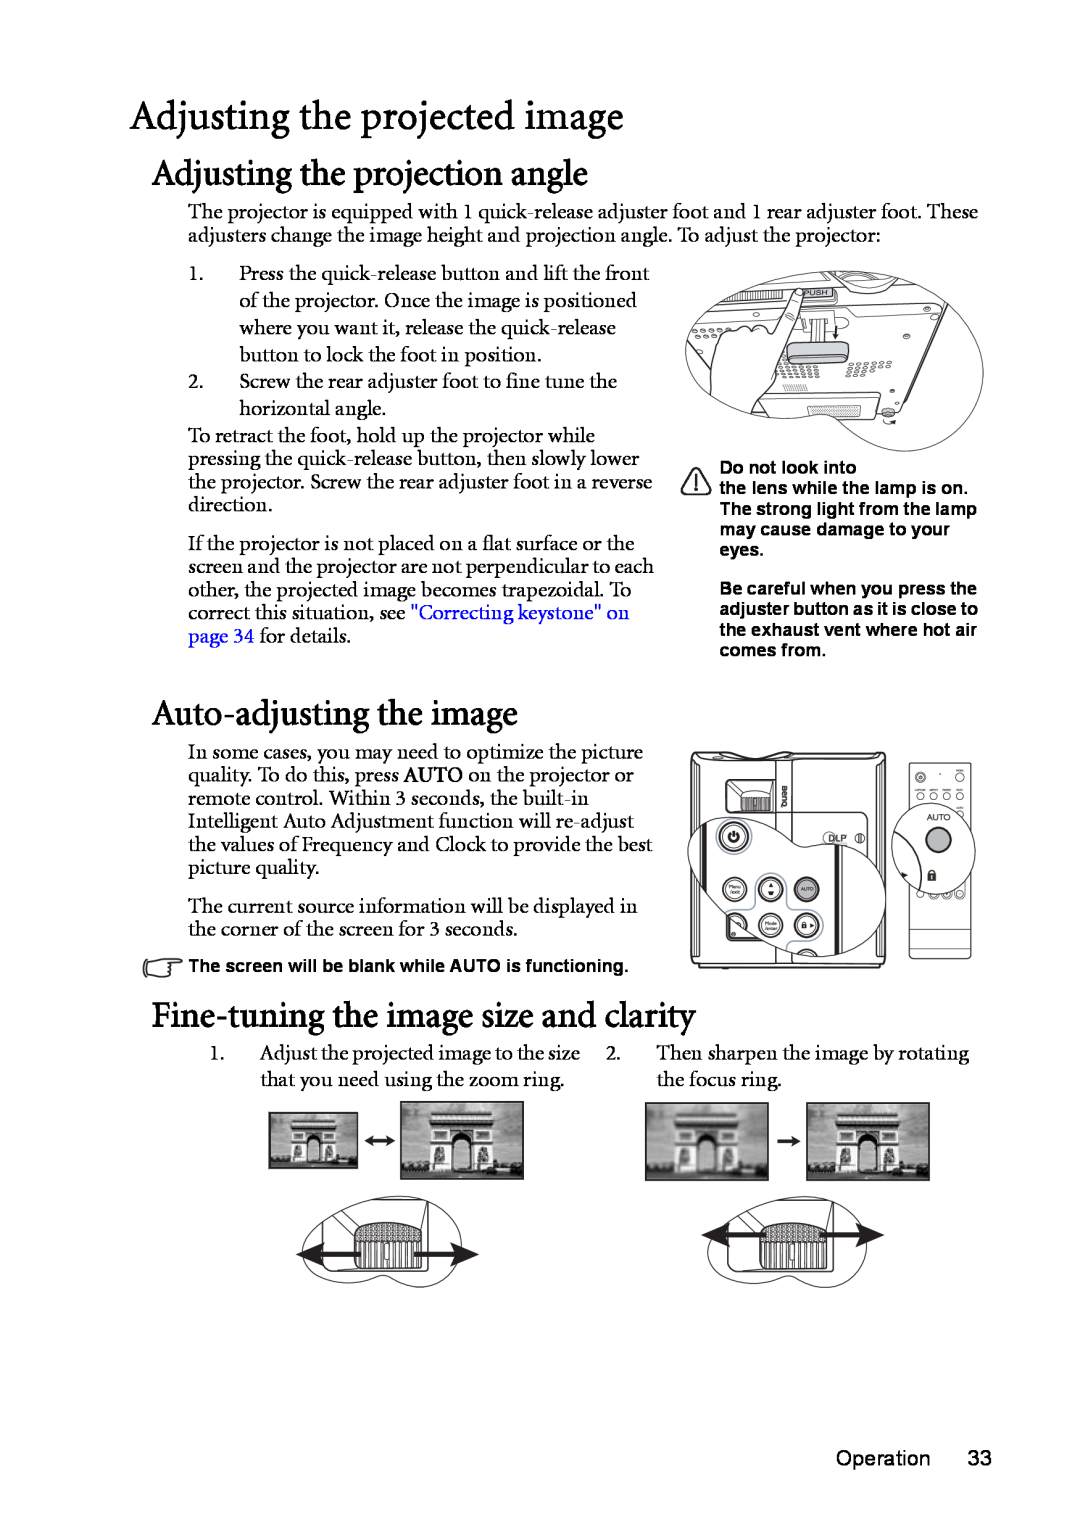 BenQ MP730 manual Adjusting the projected image, Adjusting the projection angle, Auto-adjusting the image 